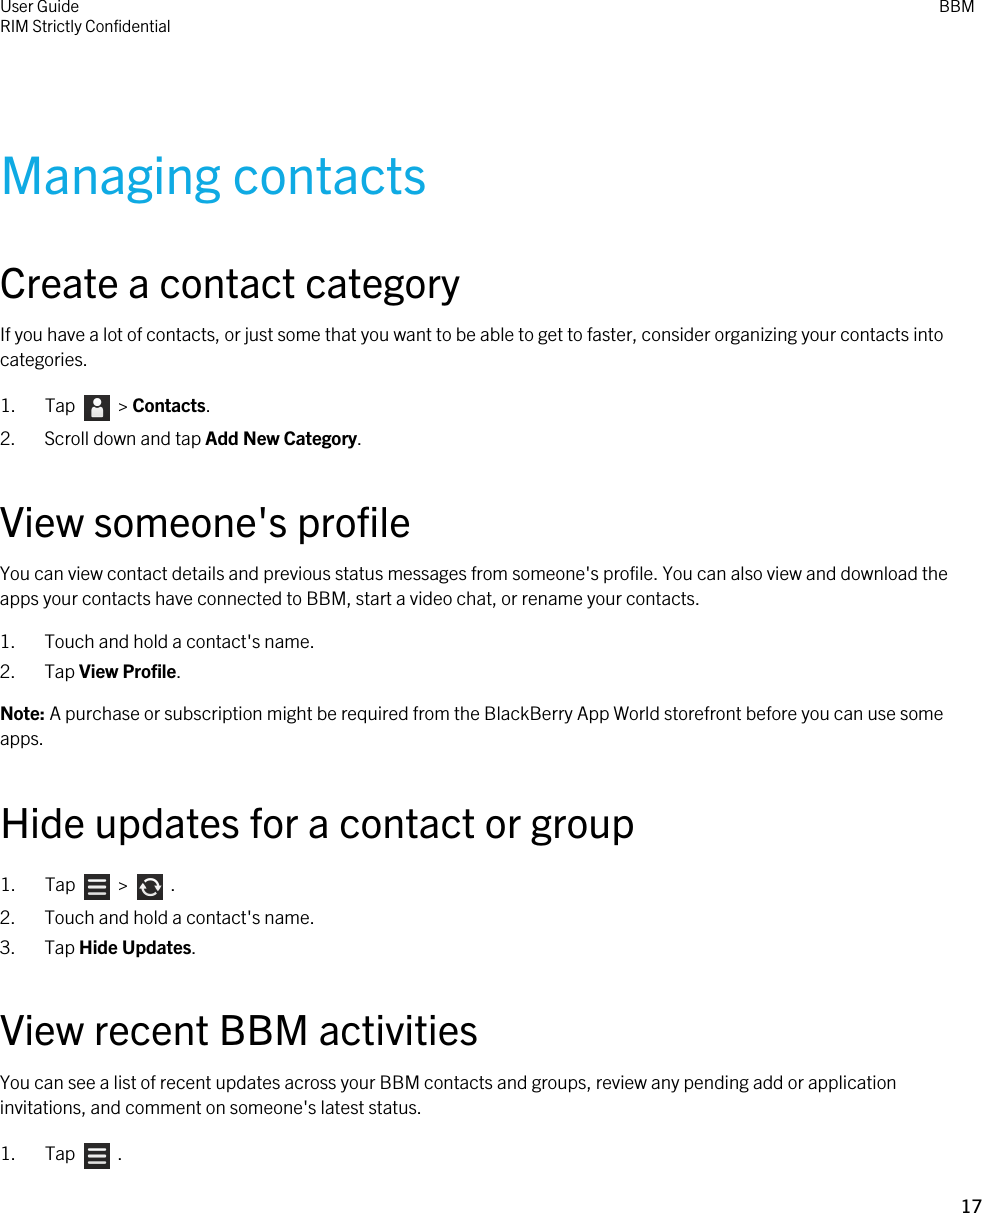 Managing contactsCreate a contact categoryIf you have a lot of contacts, or just some that you want to be able to get to faster, consider organizing your contacts into categories.1.  Tap    &gt; Contacts.2. Scroll down and tap Add New Category.View someone&apos;s profileYou can view contact details and previous status messages from someone&apos;s profile. You can also view and download the apps your contacts have connected to BBM, start a video chat, or rename your contacts.1. Touch and hold a contact&apos;s name.2. Tap View Profile.Note: A purchase or subscription might be required from the BlackBerry App World storefront before you can use some apps.Hide updates for a contact or group1.  Tap    &gt;    .2. Touch and hold a contact&apos;s name.3. Tap Hide Updates.View recent BBM activitiesYou can see a list of recent updates across your BBM contacts and groups, review any pending add or application invitations, and comment on someone&apos;s latest status.1.  Tap    .User GuideRIM Strictly Confidential BBM17 